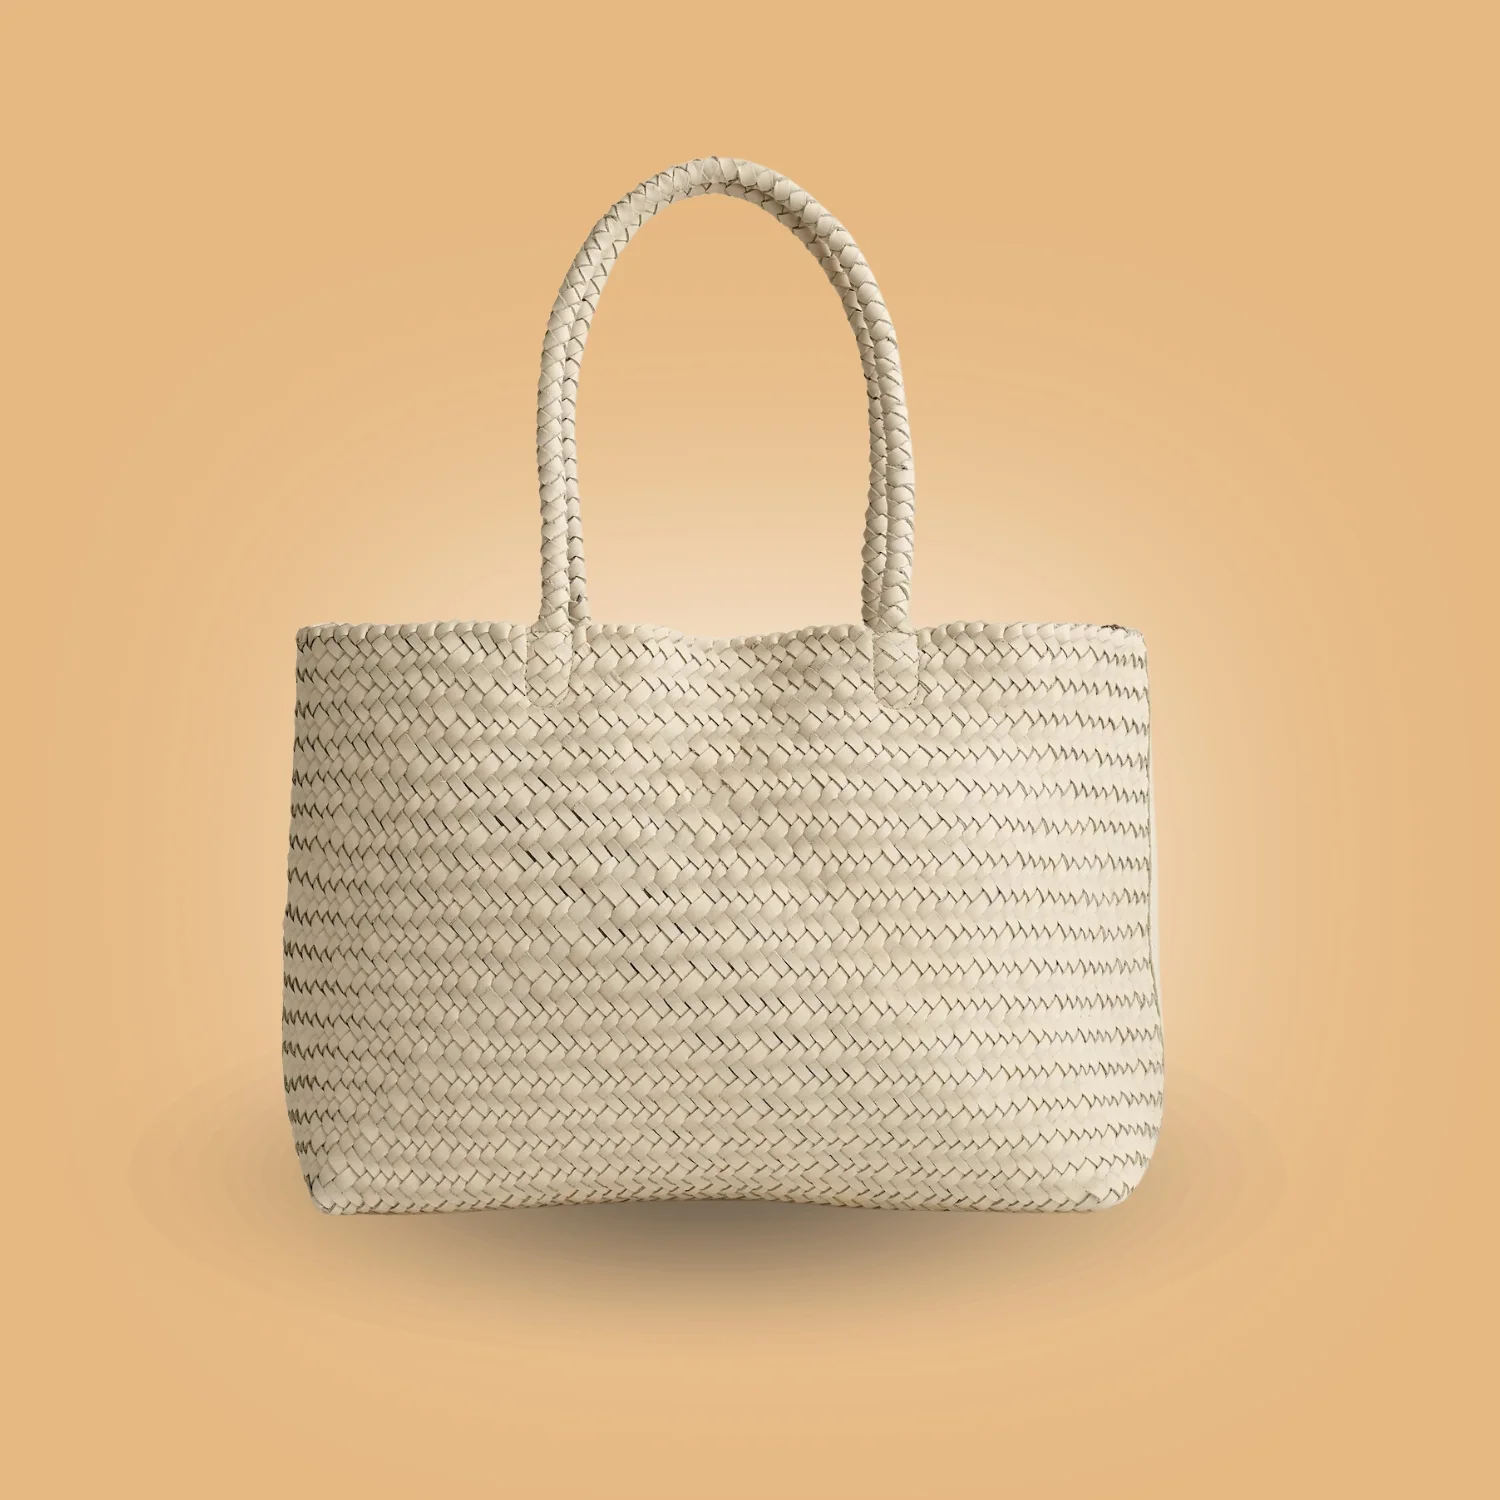 Shop Classy Handmade White Leather Woven Tote Bag For Women